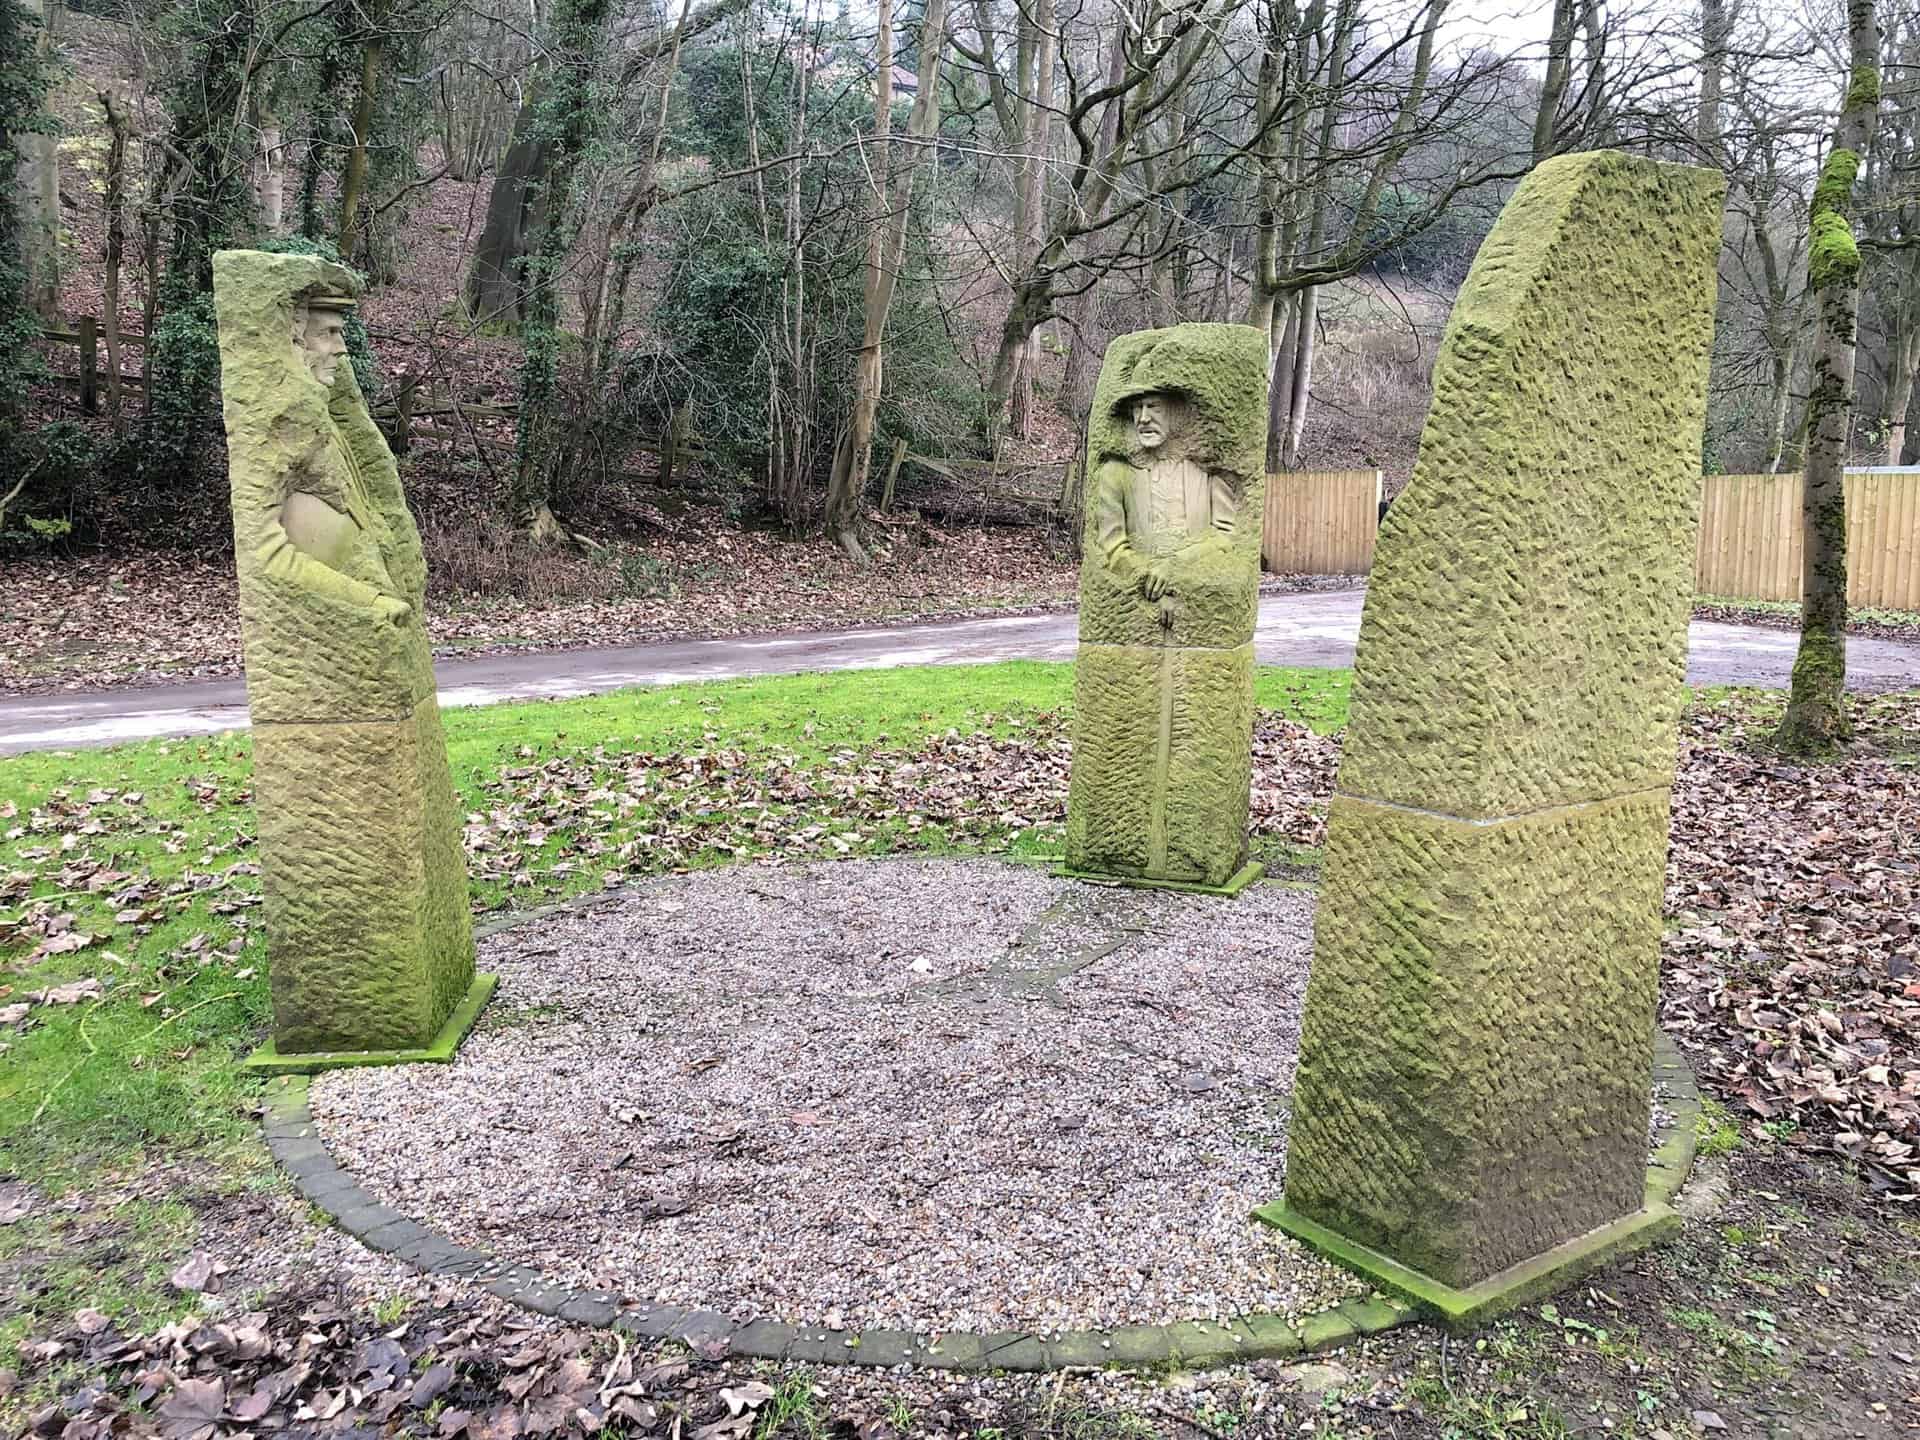 The sculpture 'Pillars Past', commissioned by Sustrans, forms part of the public art trail 'Passing Places' which mirrors the long distance Way Of The Roses Cycle Route. You'll pass the sculpture as you near the end of this Brimham Rocks walk.